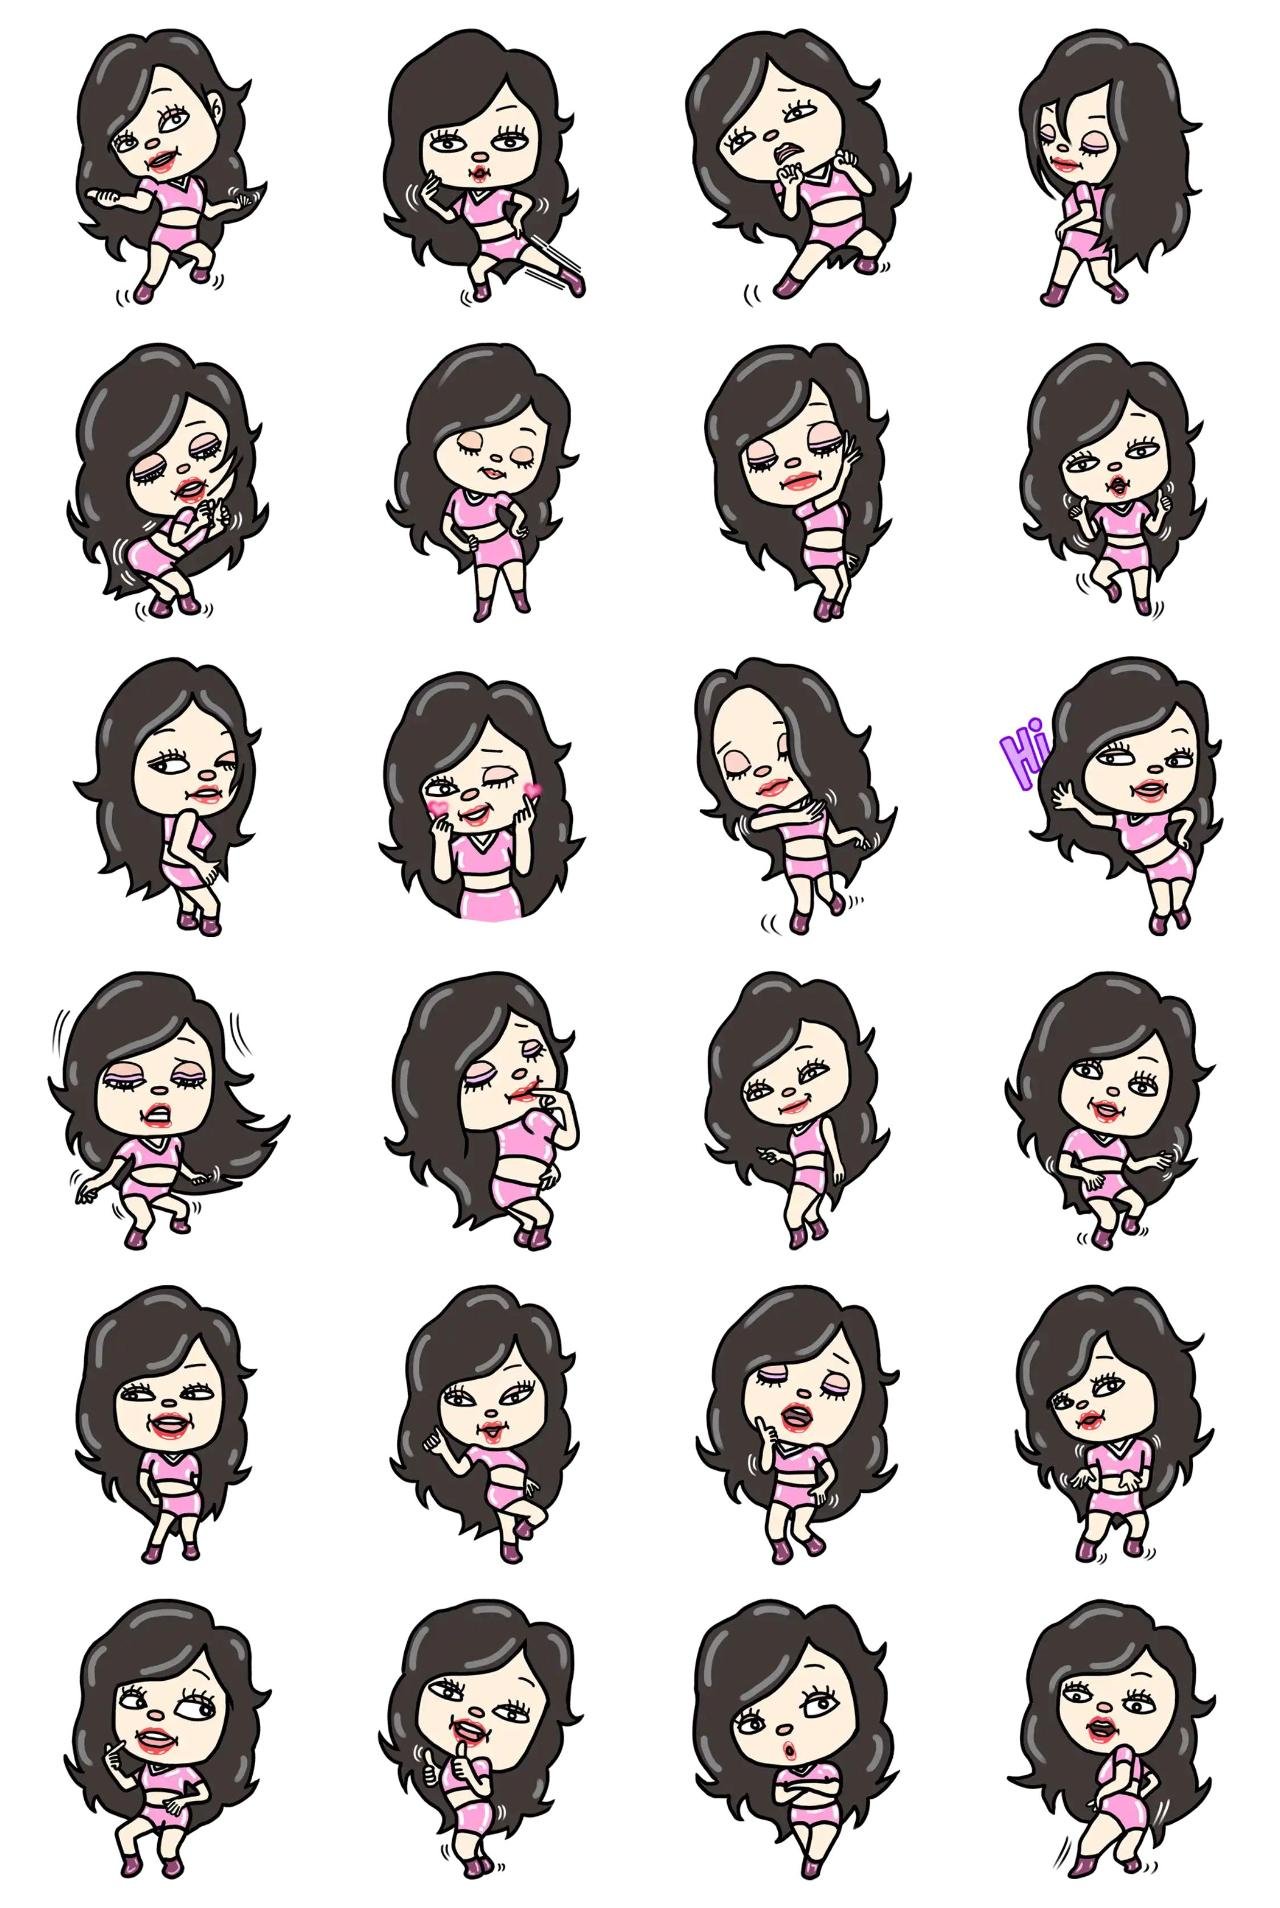 KPOP girl Chohee People sticker pack for Whatsapp, Telegram, Signal, and others chatting and message apps